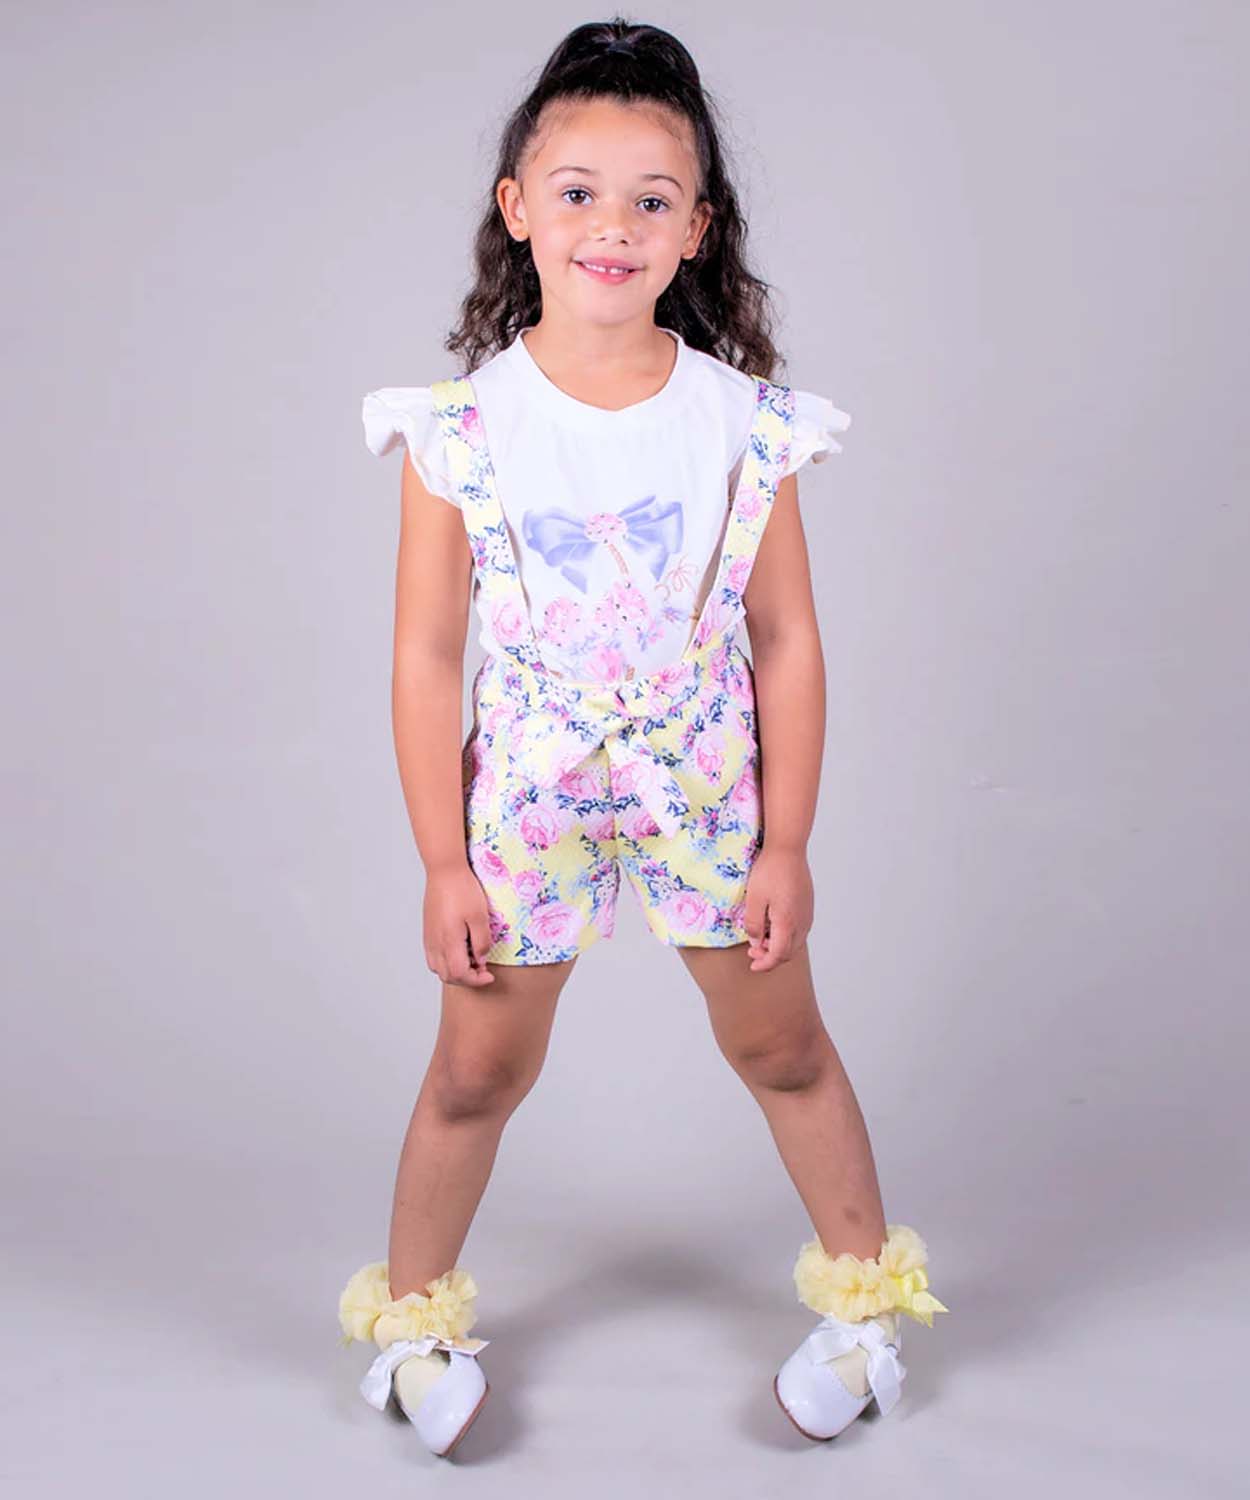 Girls 2 Piece Set T-shirt With Lemon And Pink Floral Dungaree Shorts